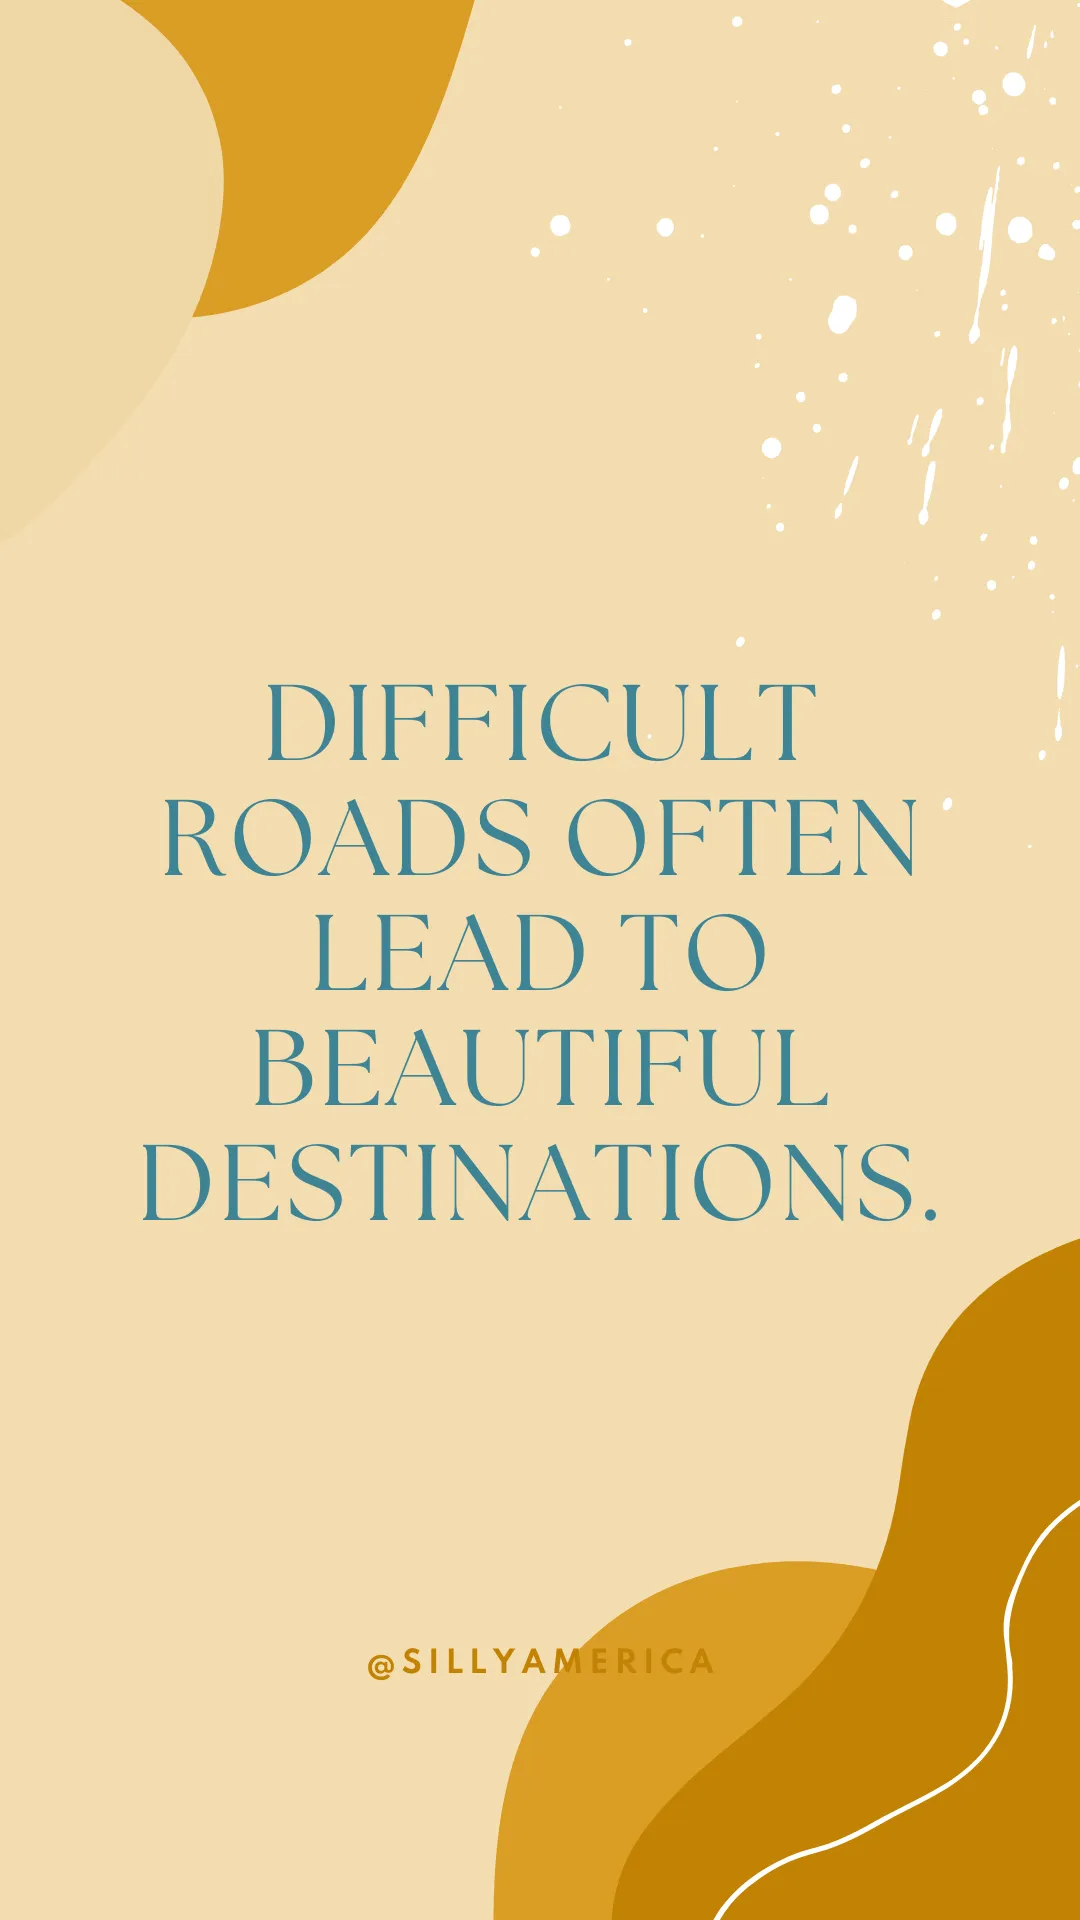 Difficult roads often lead to beautiful destinations. - Road Trip Captions for Instagram